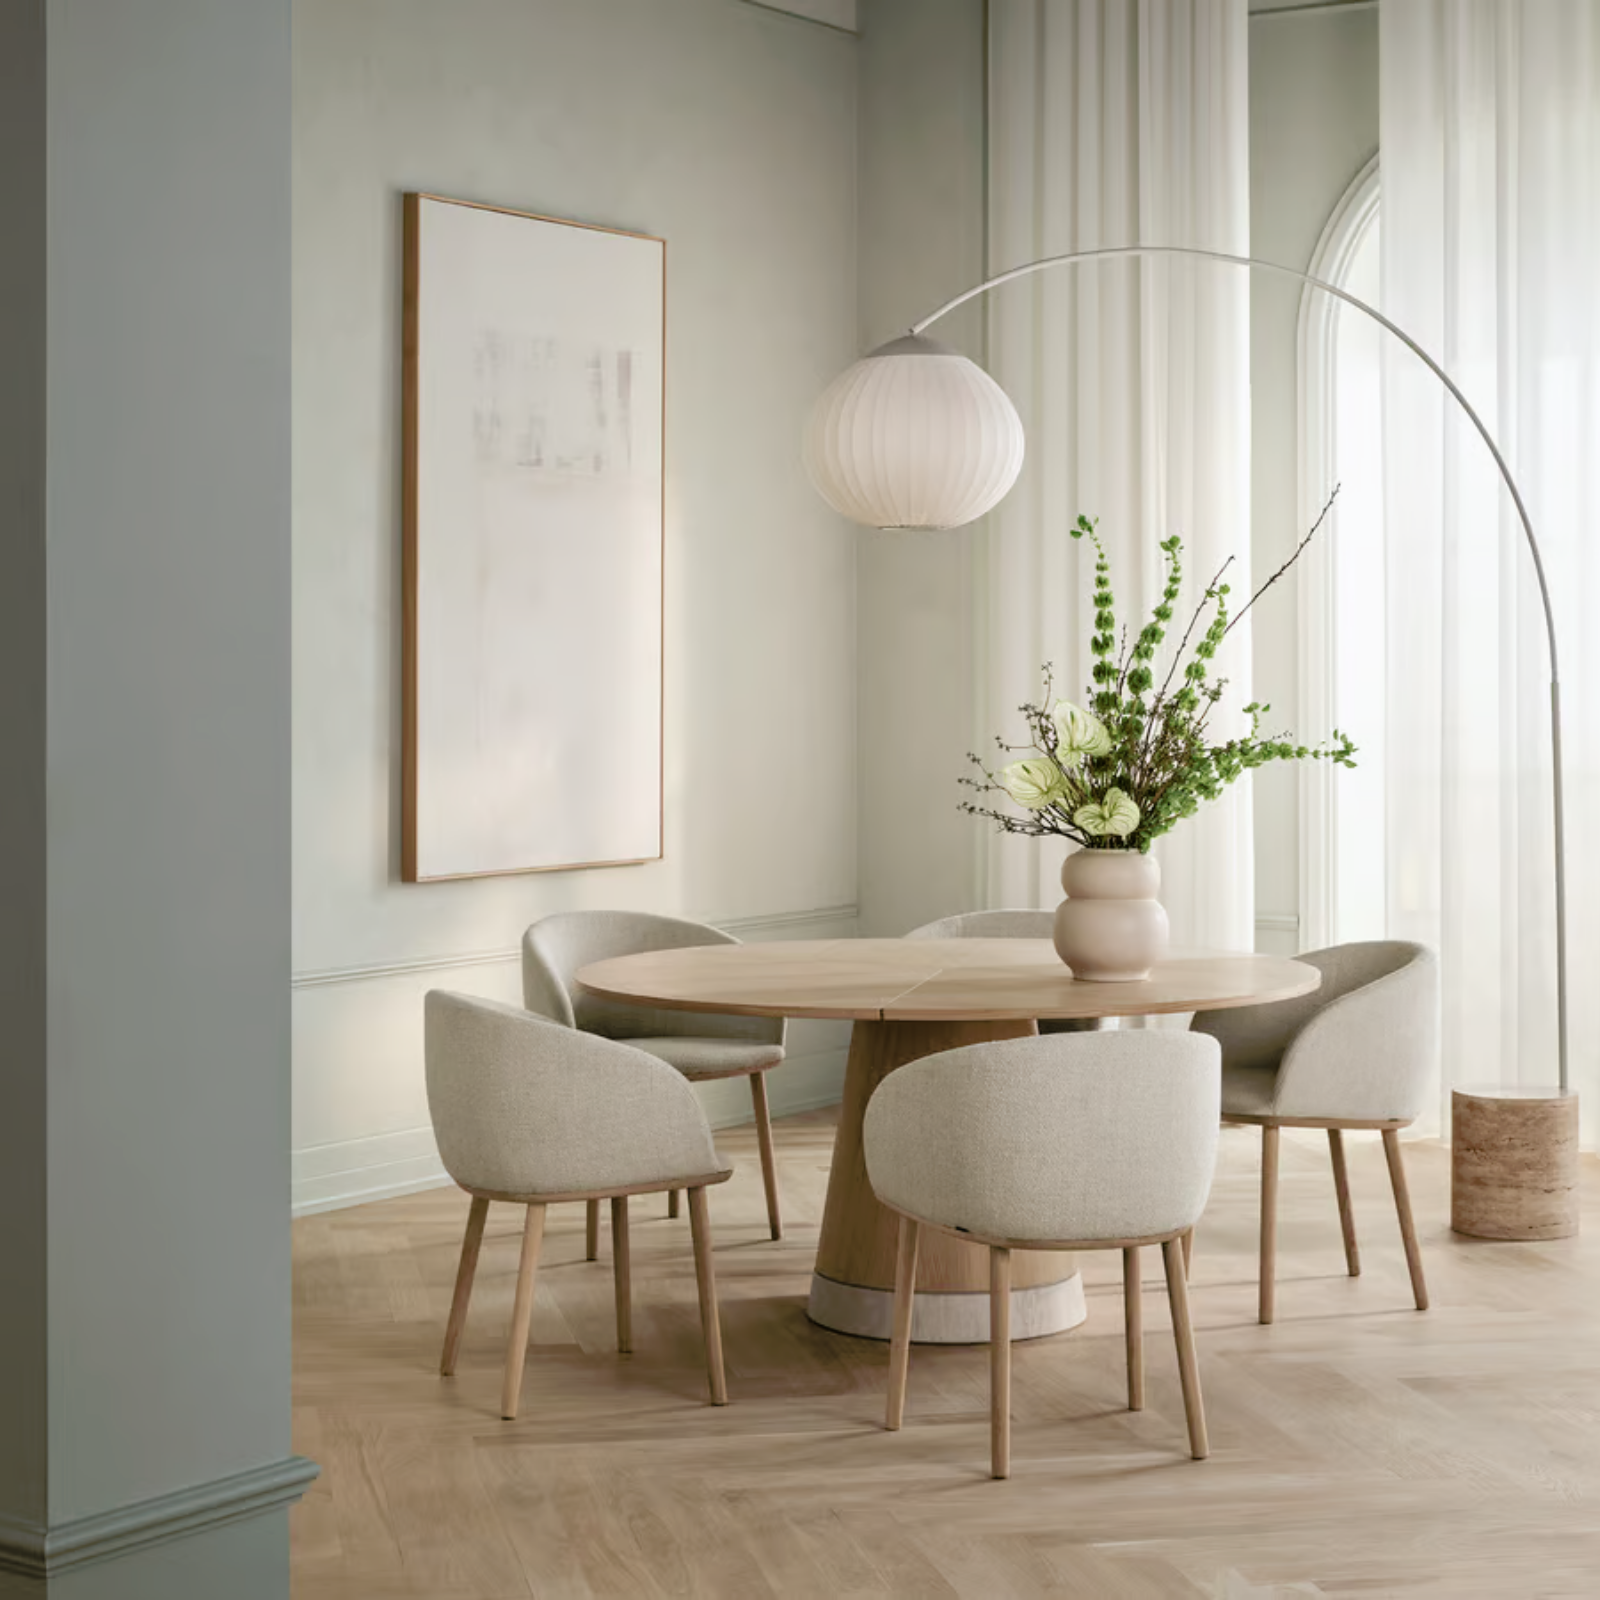 BOLIA Join Dining Chair  WHite Oak Dining Room